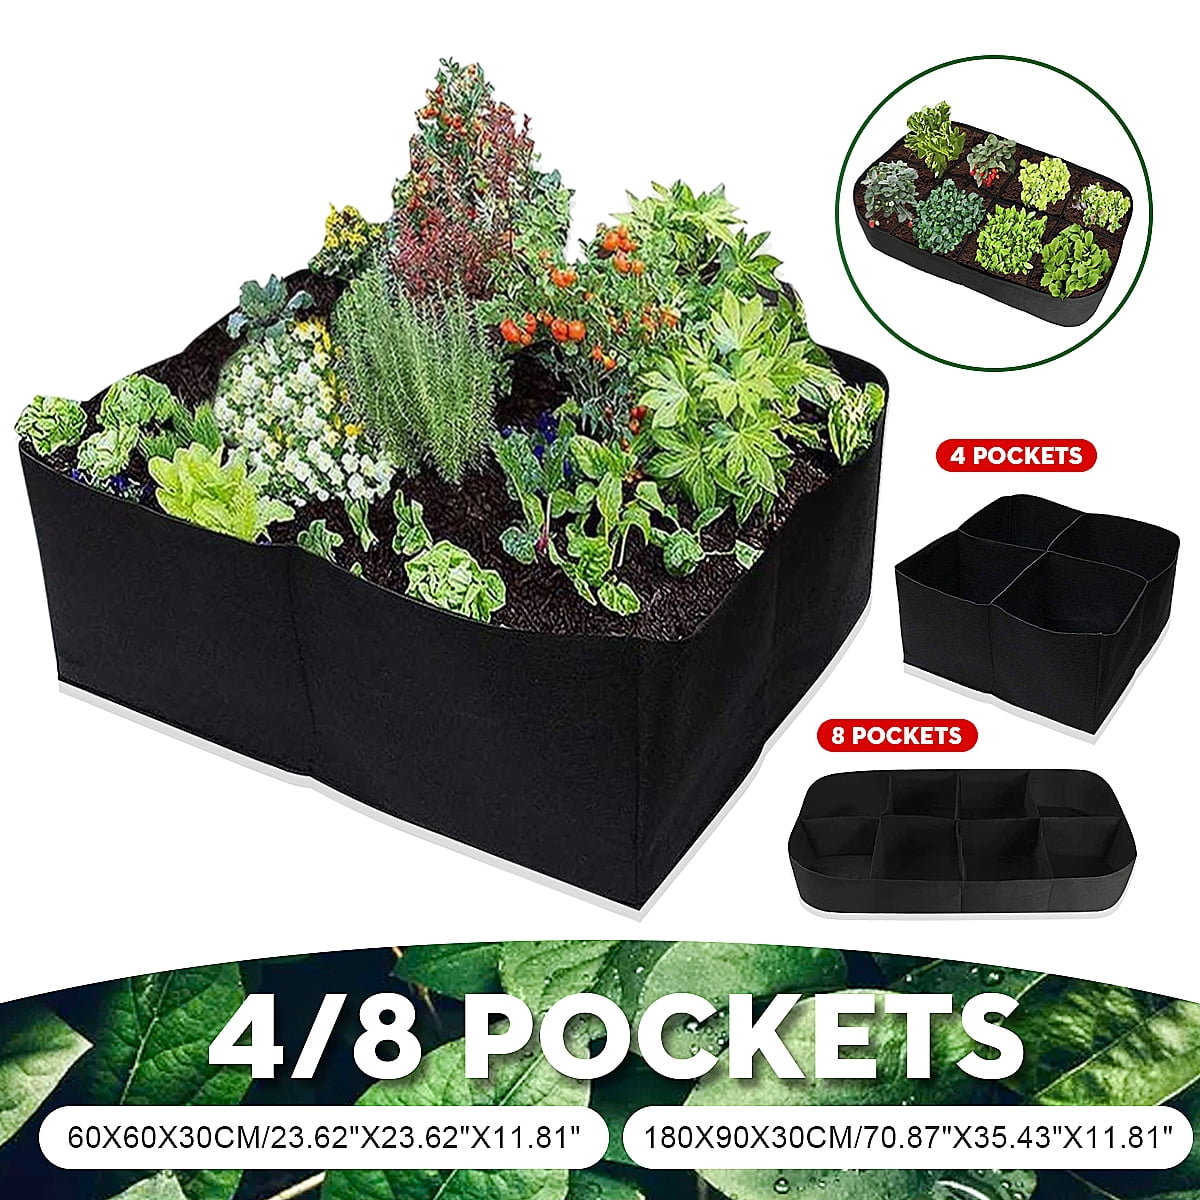 Fabric Raised Garden Bed Grow Bags Flowers Vegetable Planter Pot Pocket Pouch 